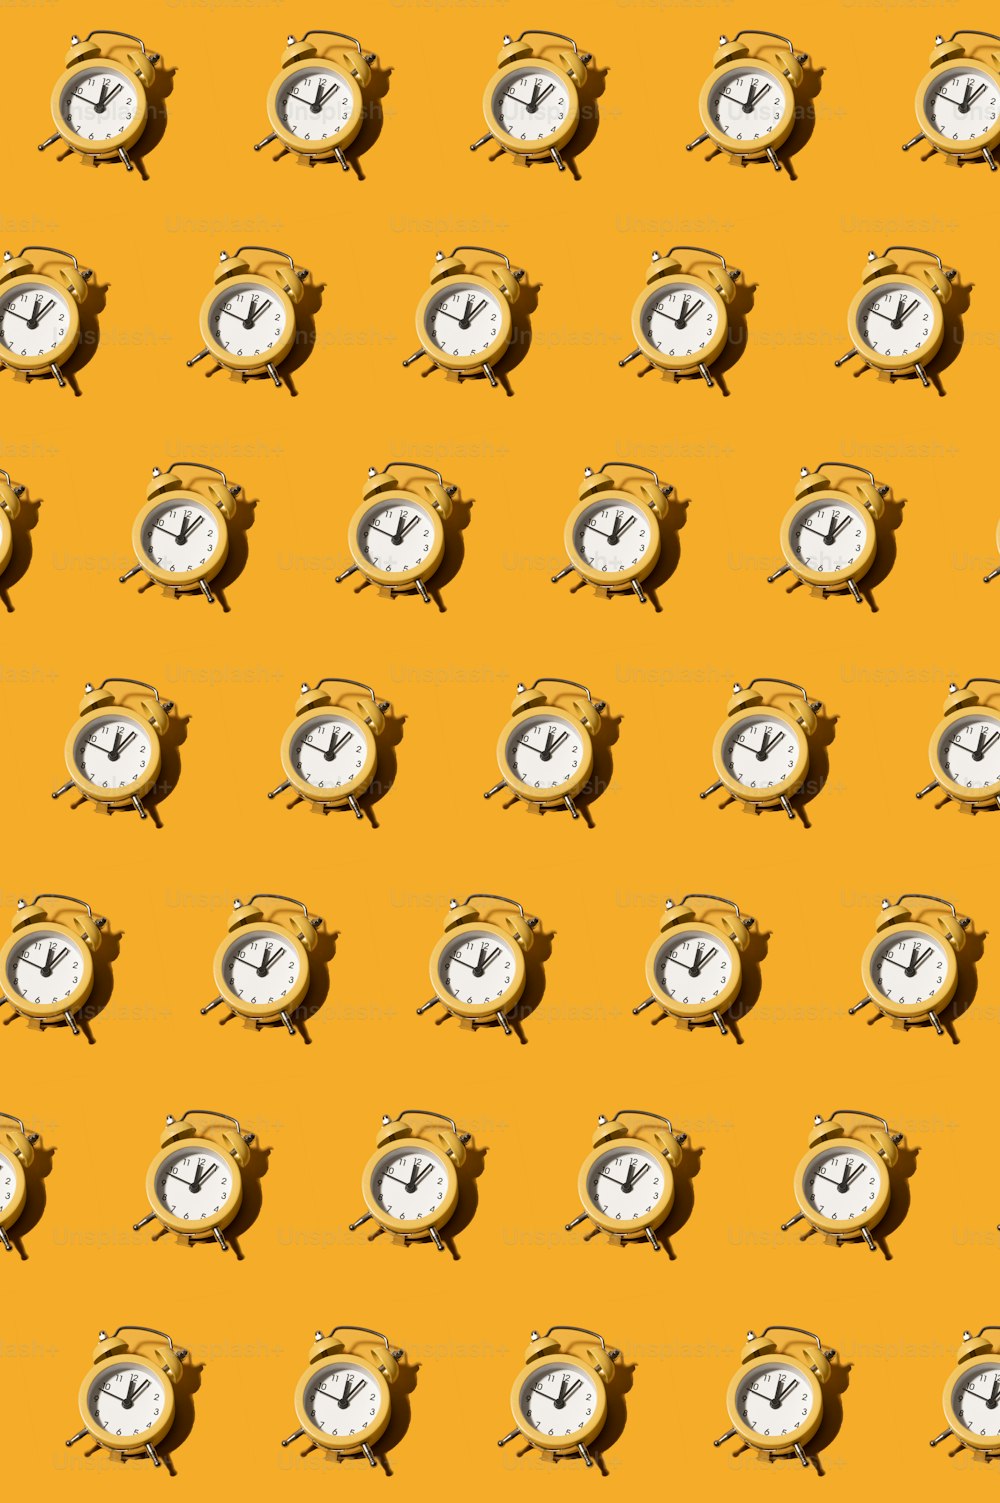 a pattern of clocks on a yellow background